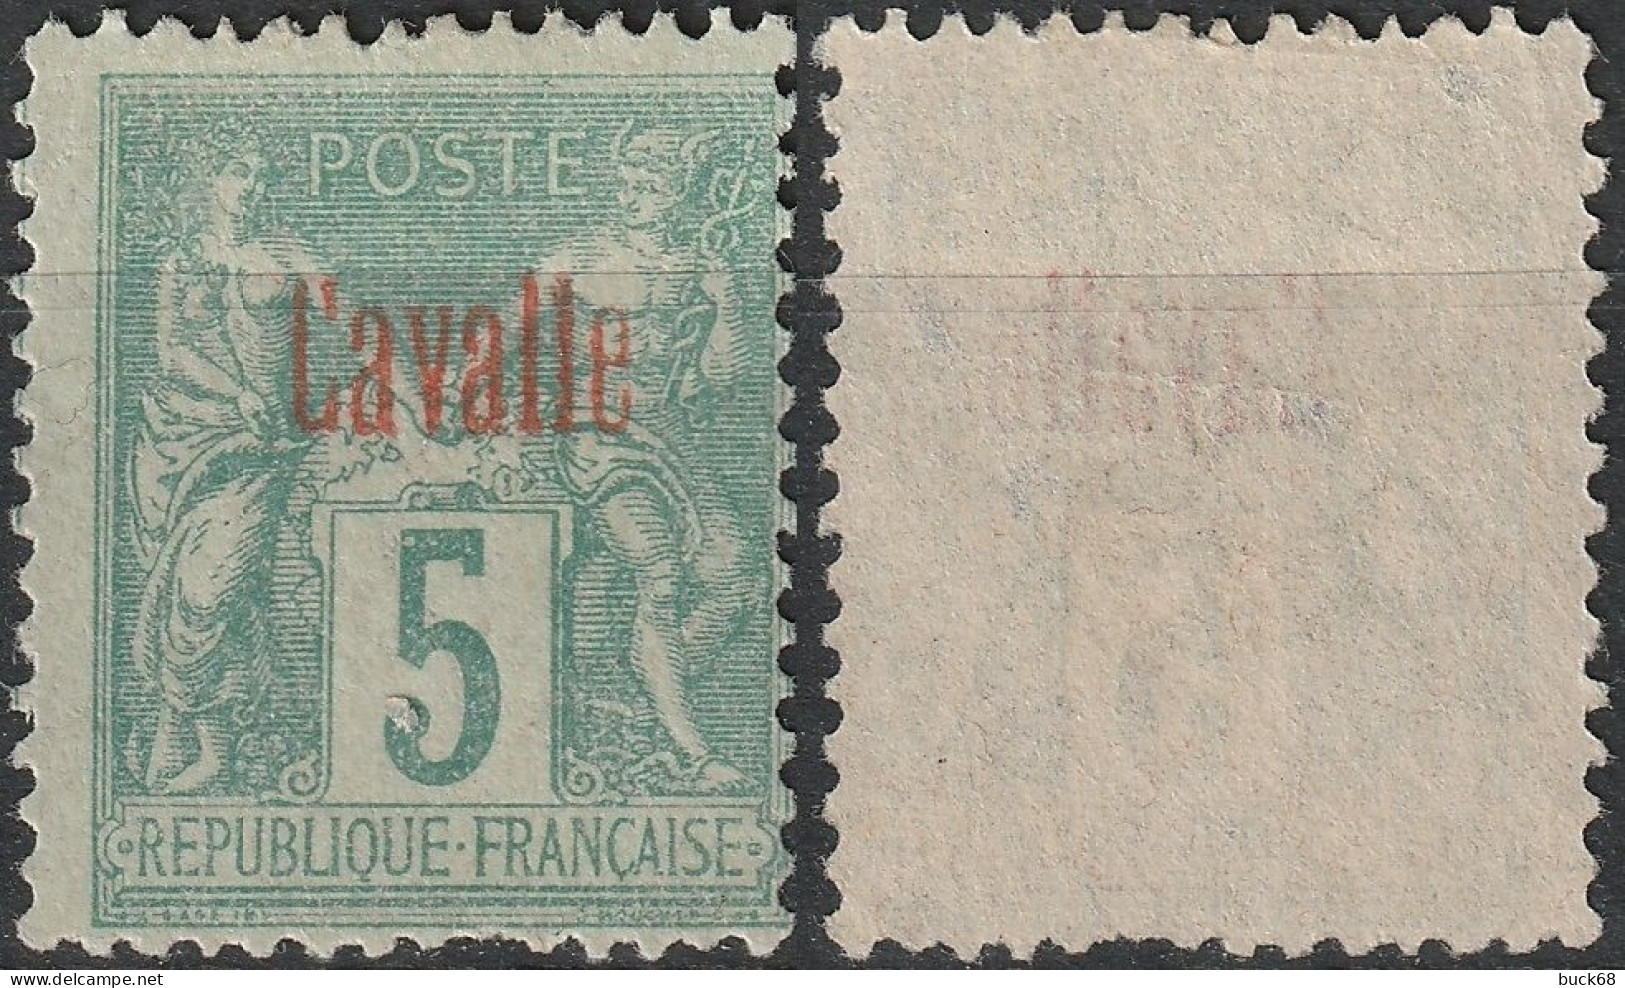 CAVALLE Poste 1a (*) MHNG Type Groupe Surcharge Rouge 1893 (CV 35 €) [ColCla] - Nuovi